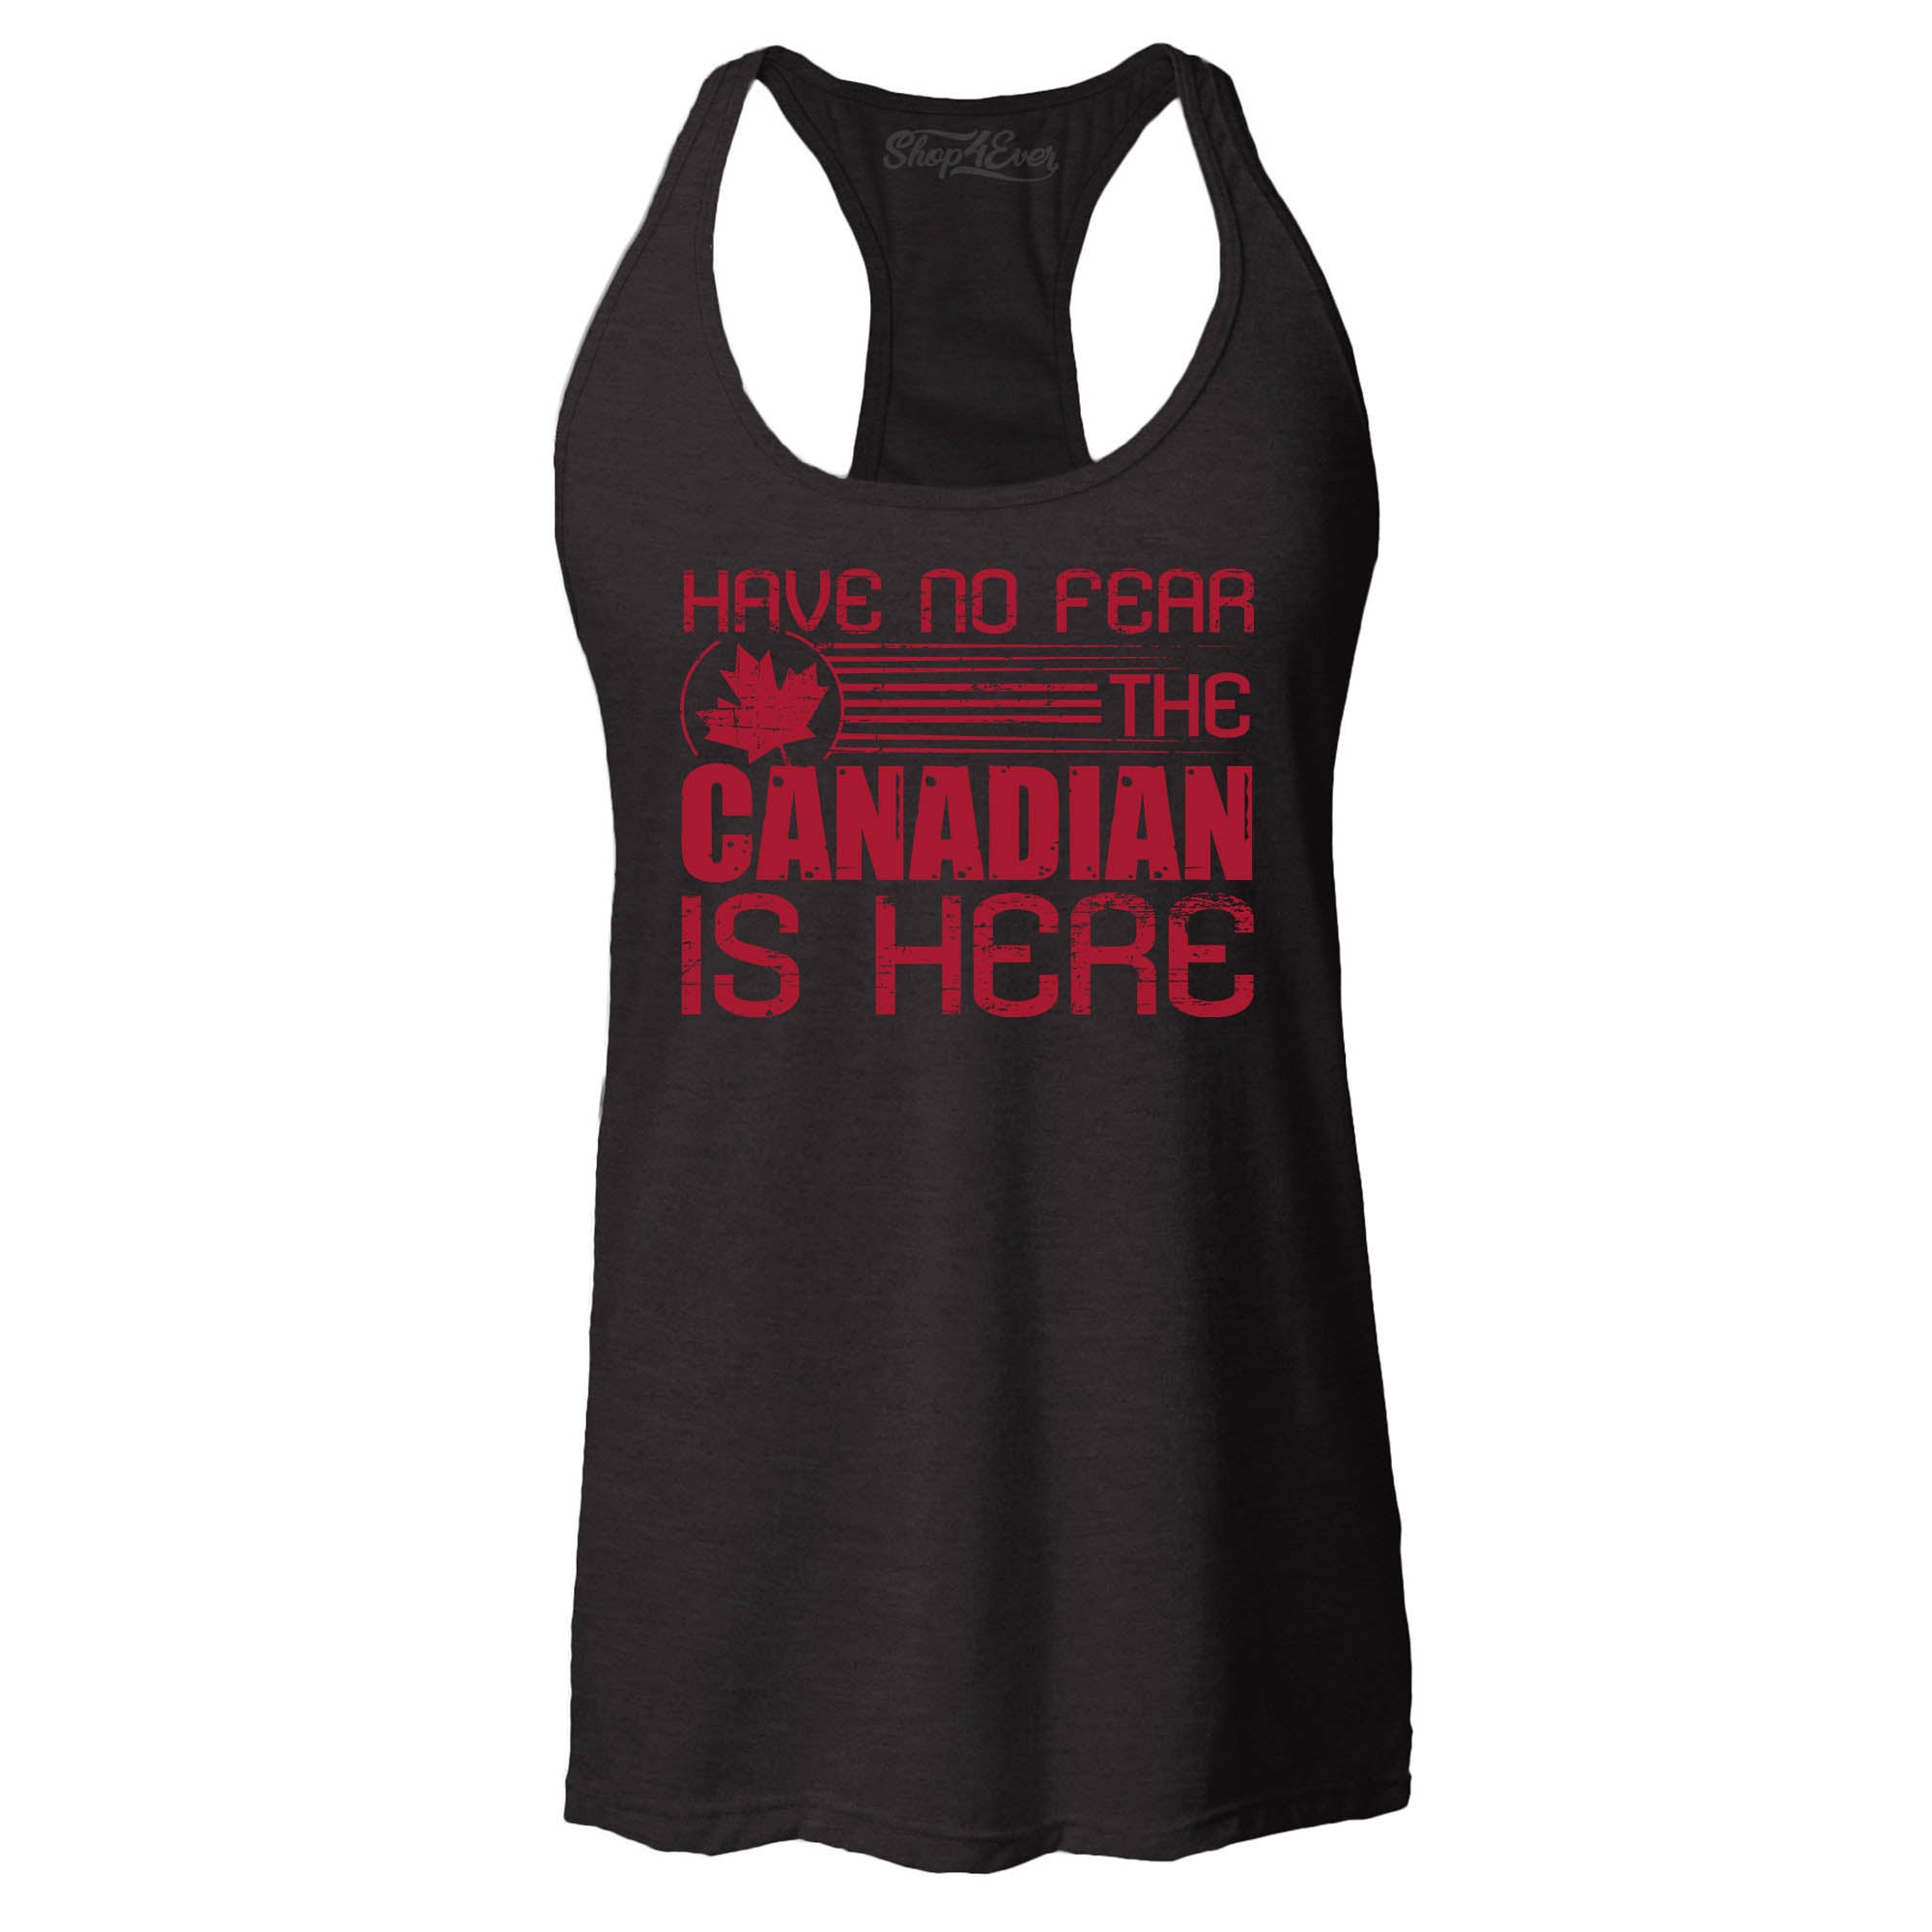 Have No Fear The Canadian is Here Canada Pride Women's Racerback Tank Top Slim Fit